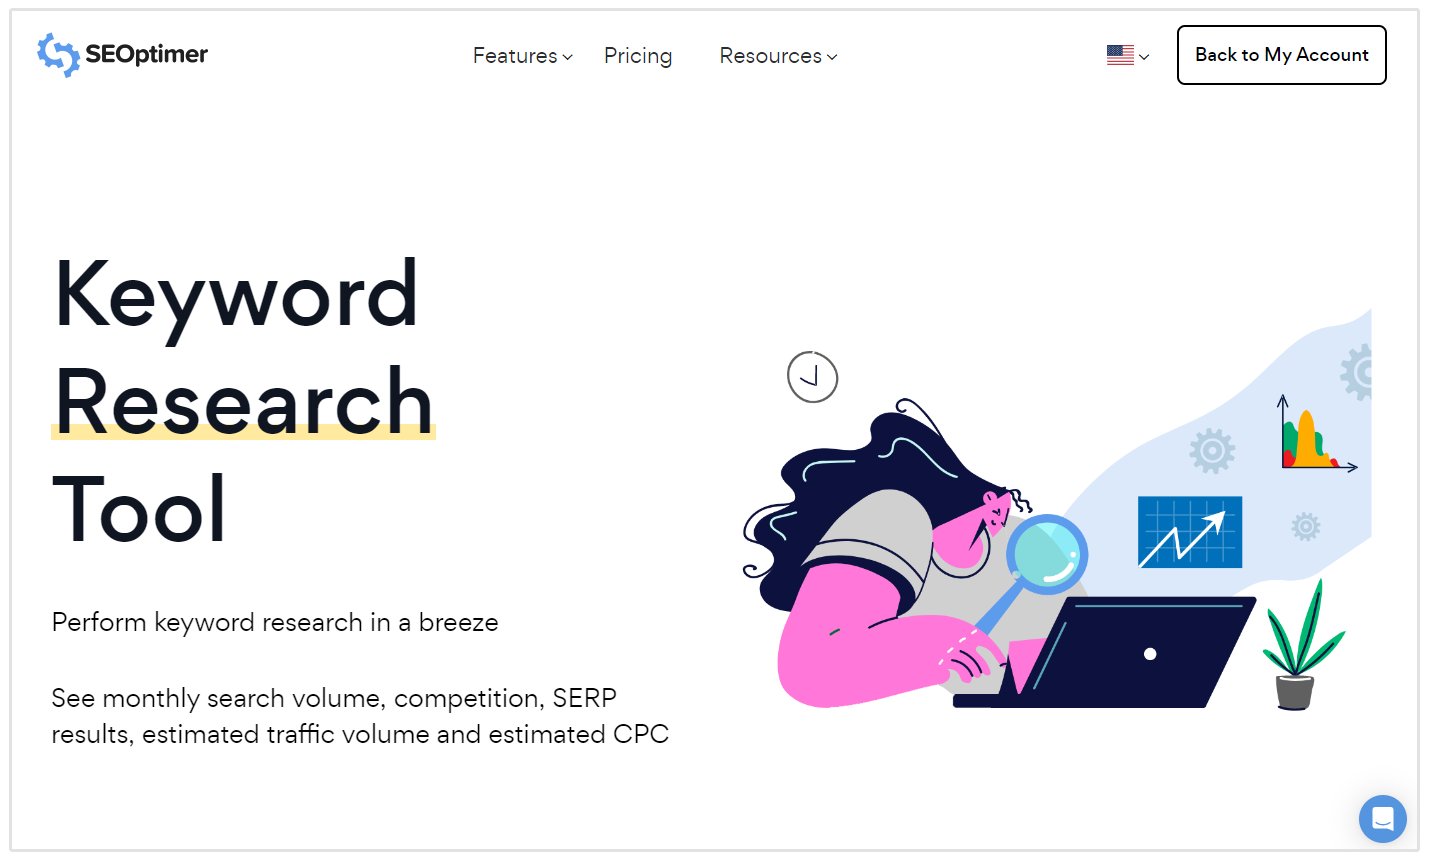 keyword research tool from SEOptimer